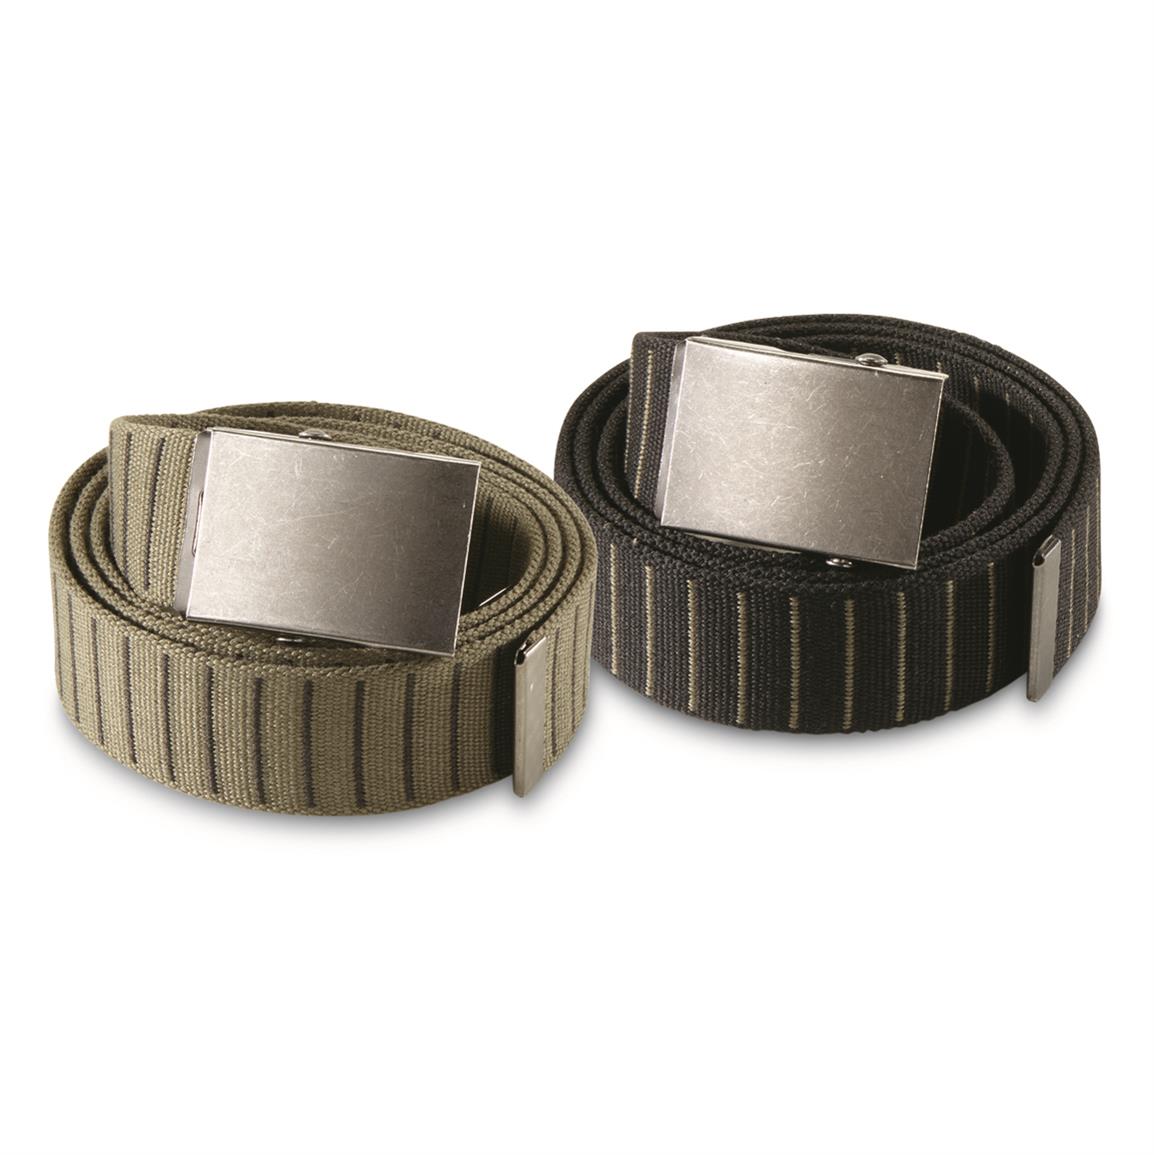 Mil-Tec 40mm Military Style Iron Buckle Roller Belts, 2 pack, Black/od